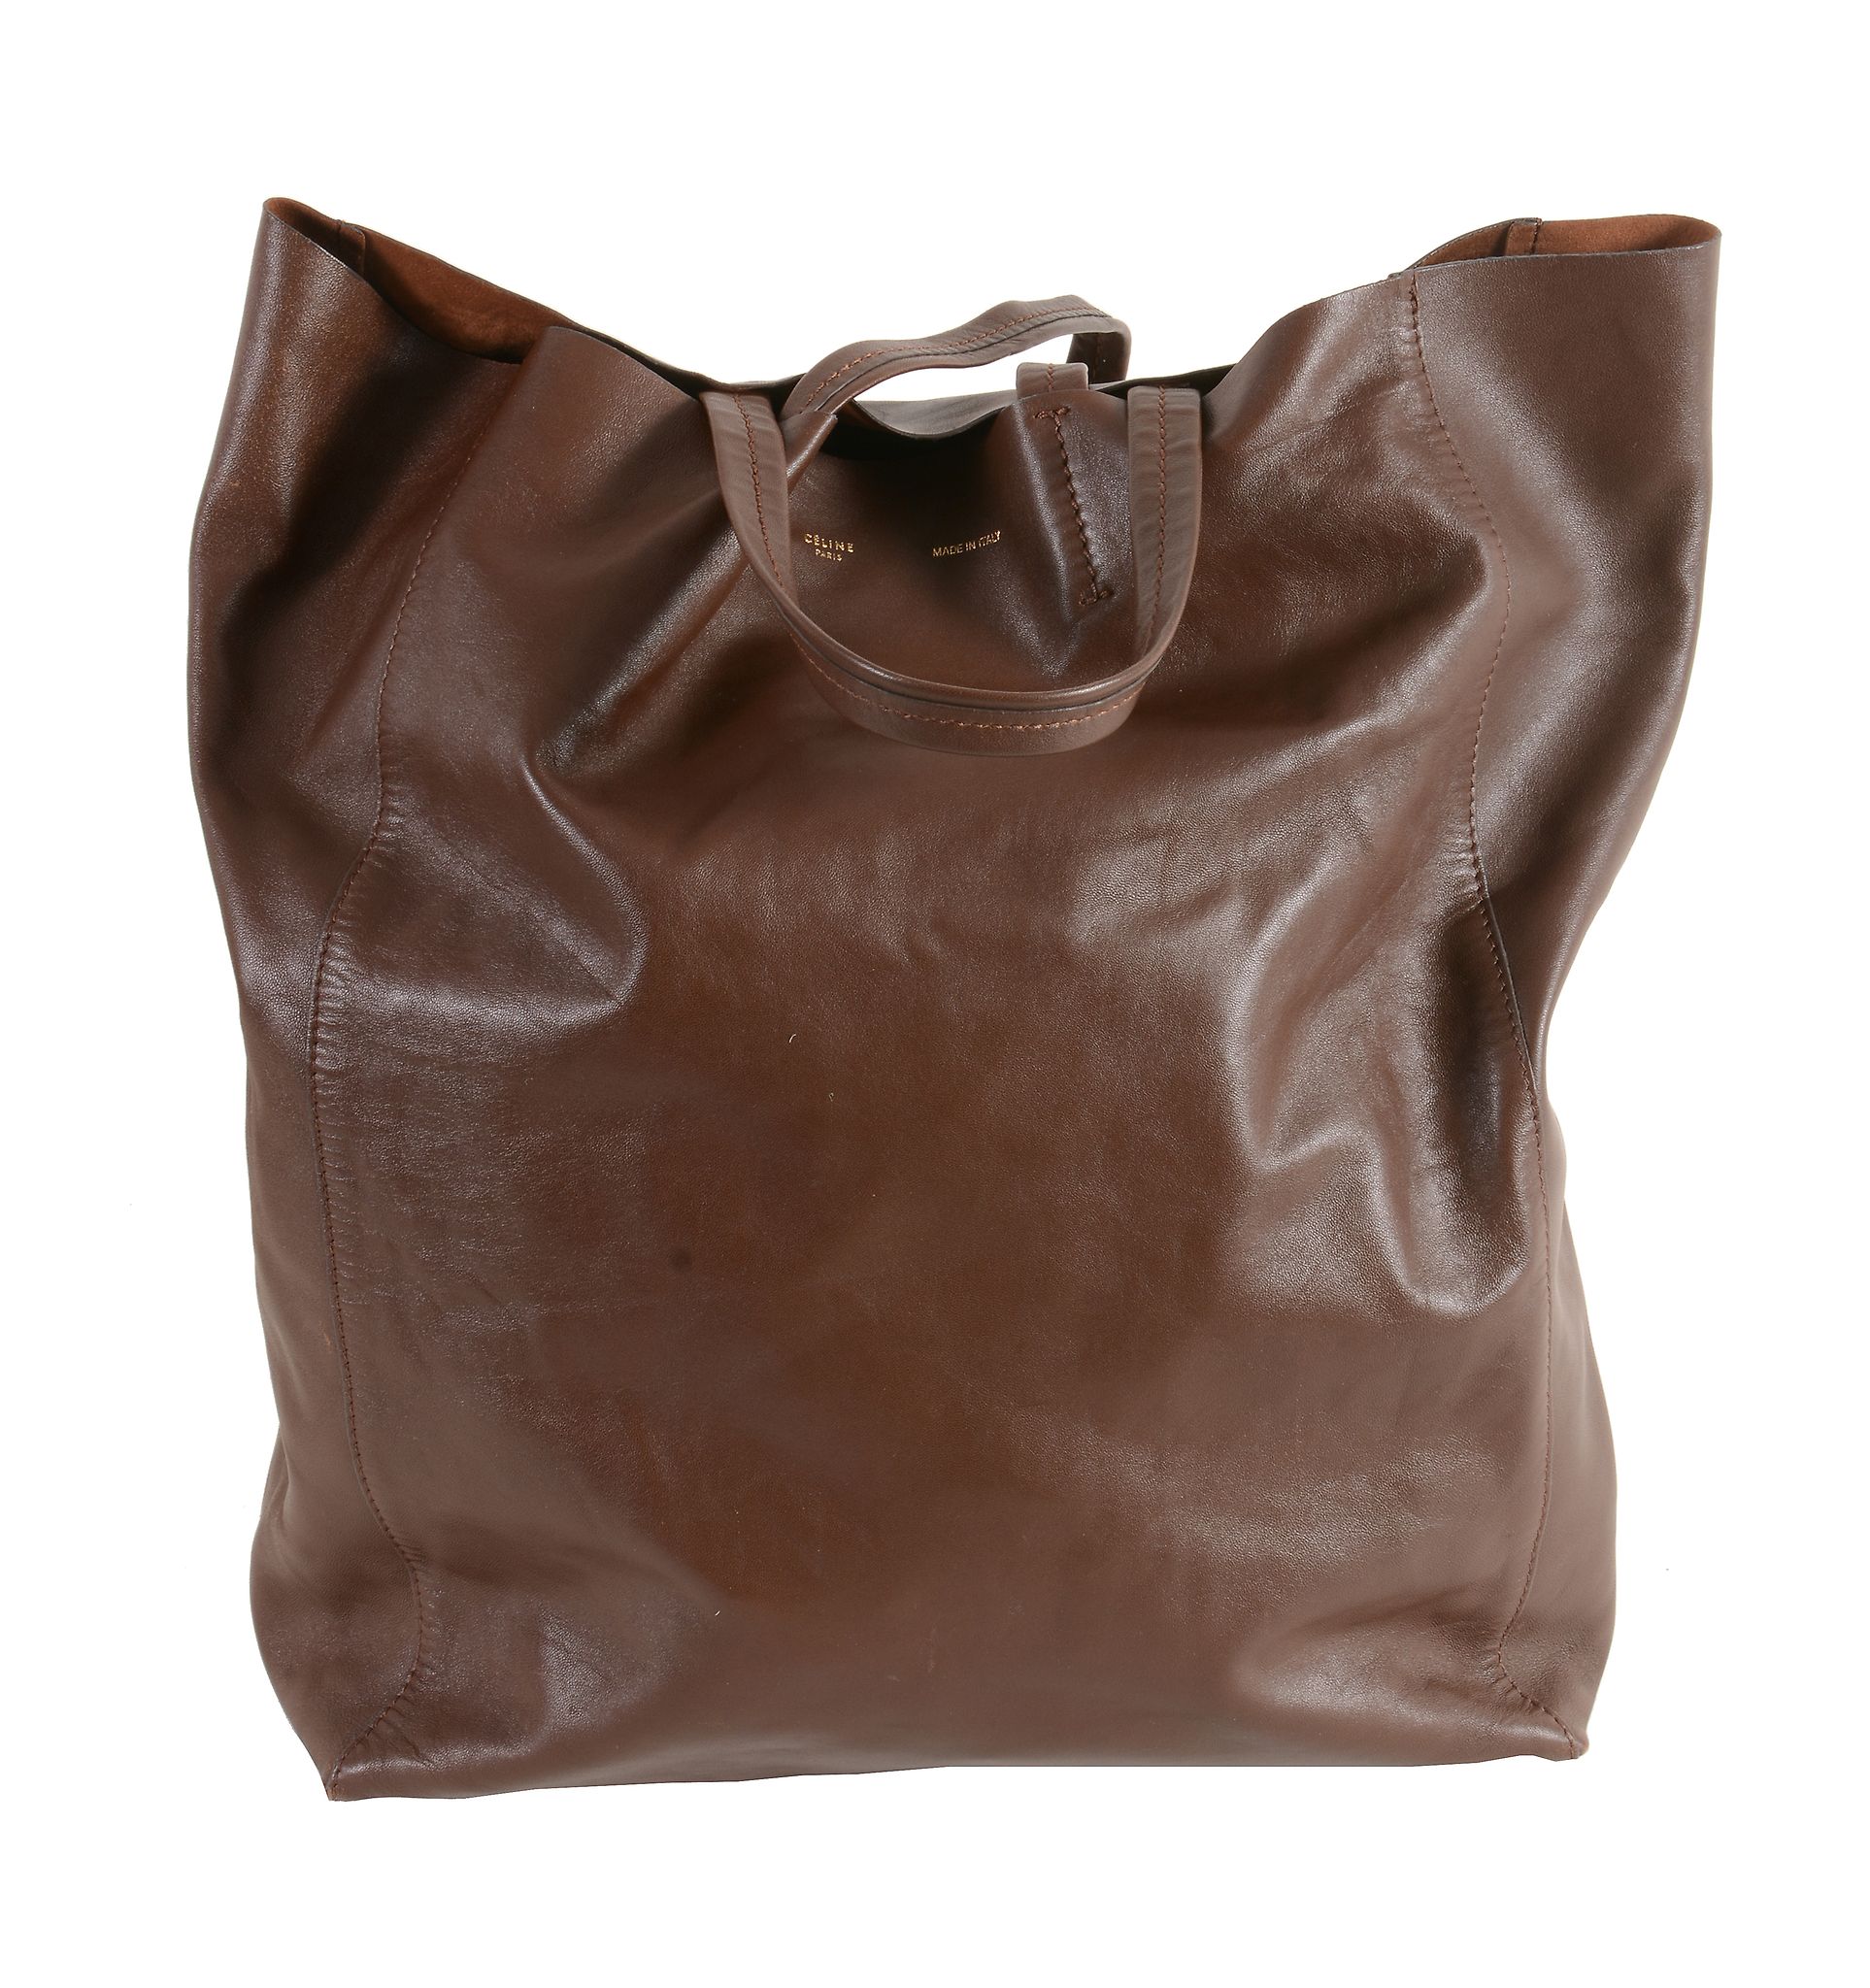 Celine, a brown leather tote bag , with short leather straps  Celine, a brown leather tote bag  , - Image 5 of 5